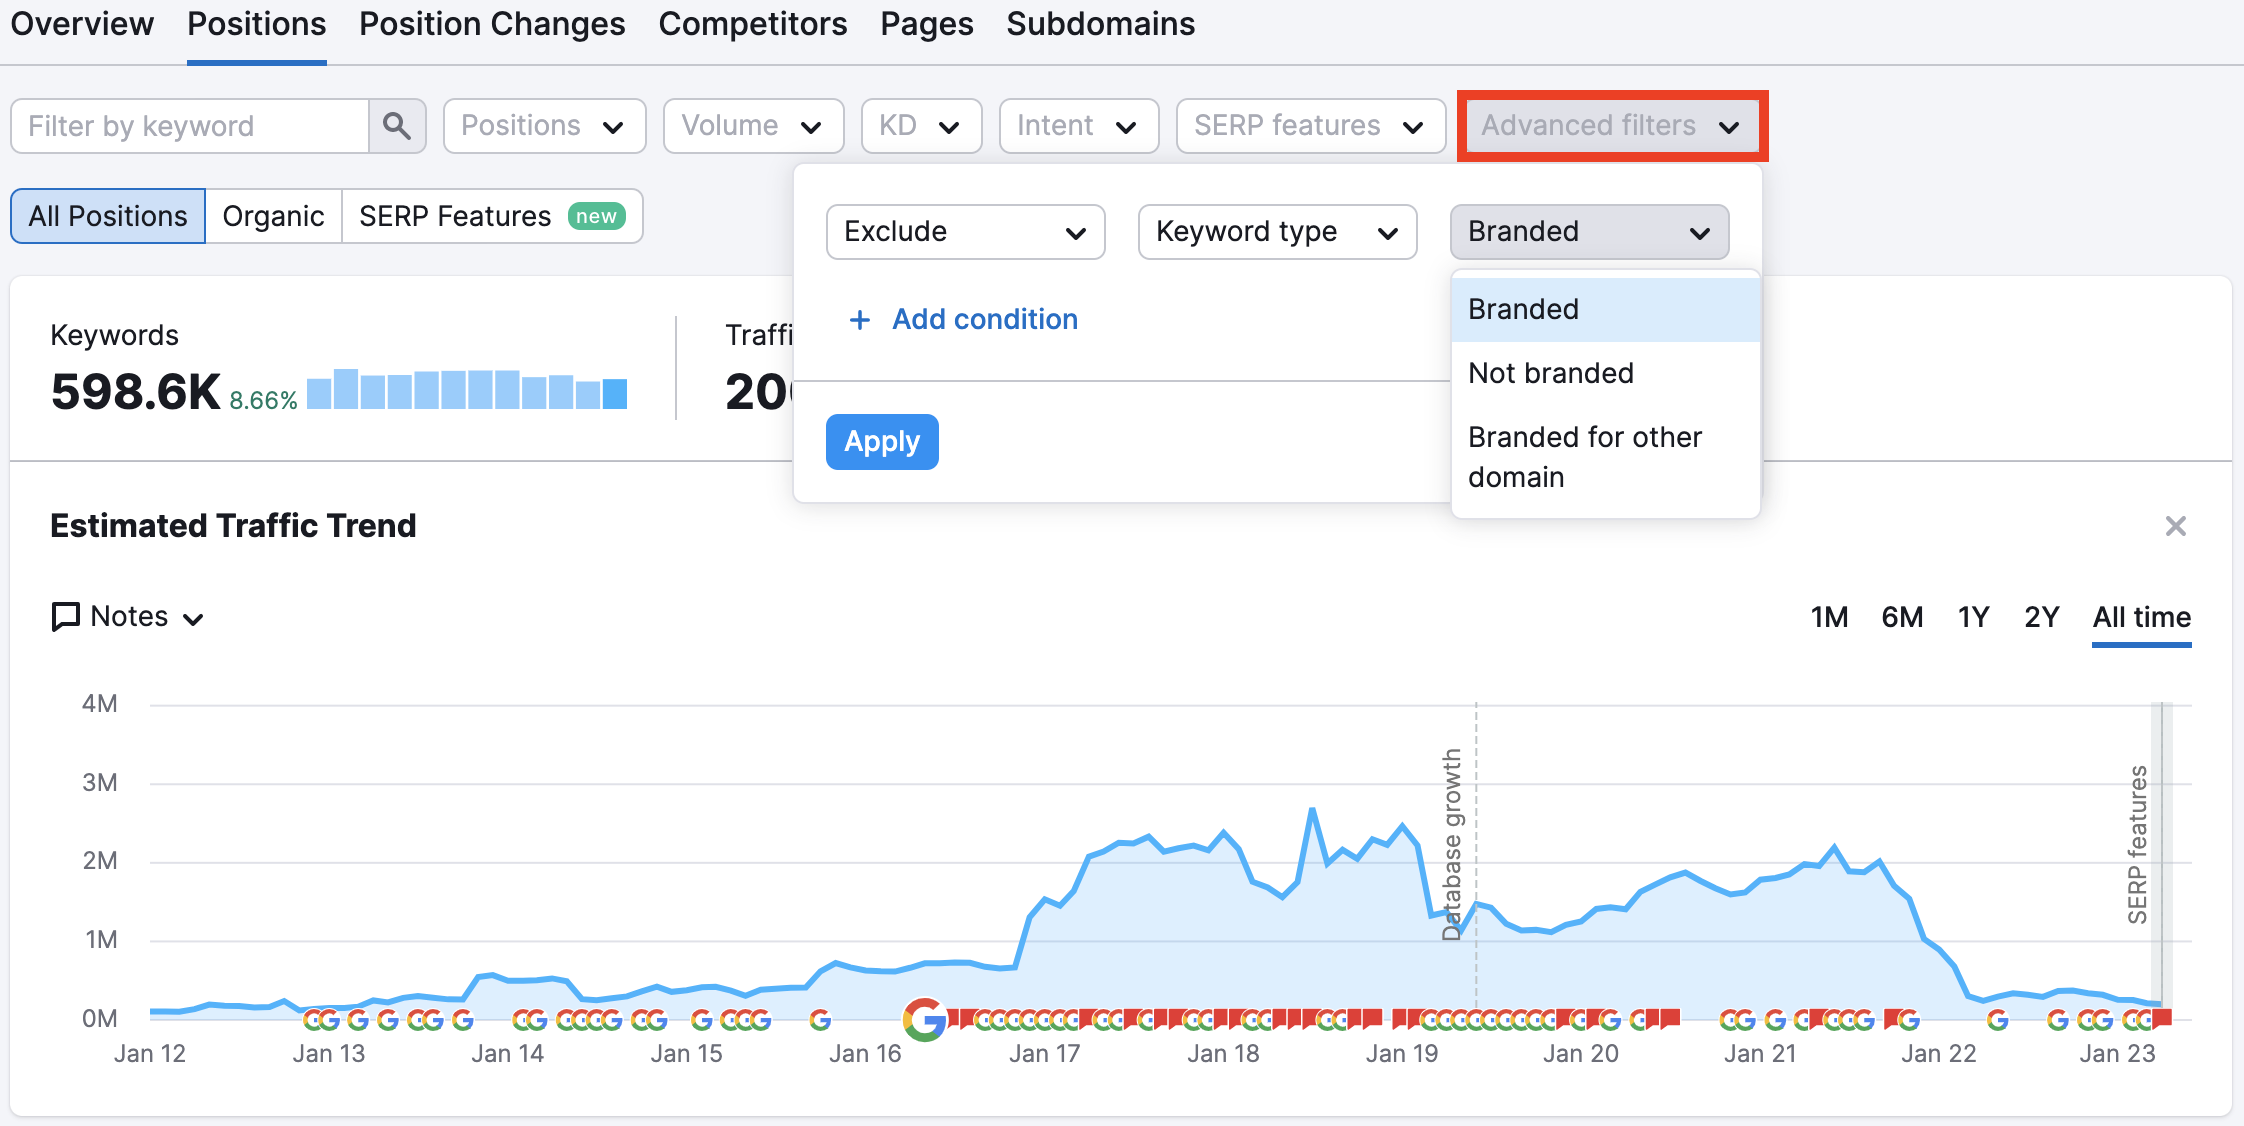 Screenshot showing how to filter Branded and Non-Branded keywords in the Organic Positions and Position Changes reports in Semrush.
